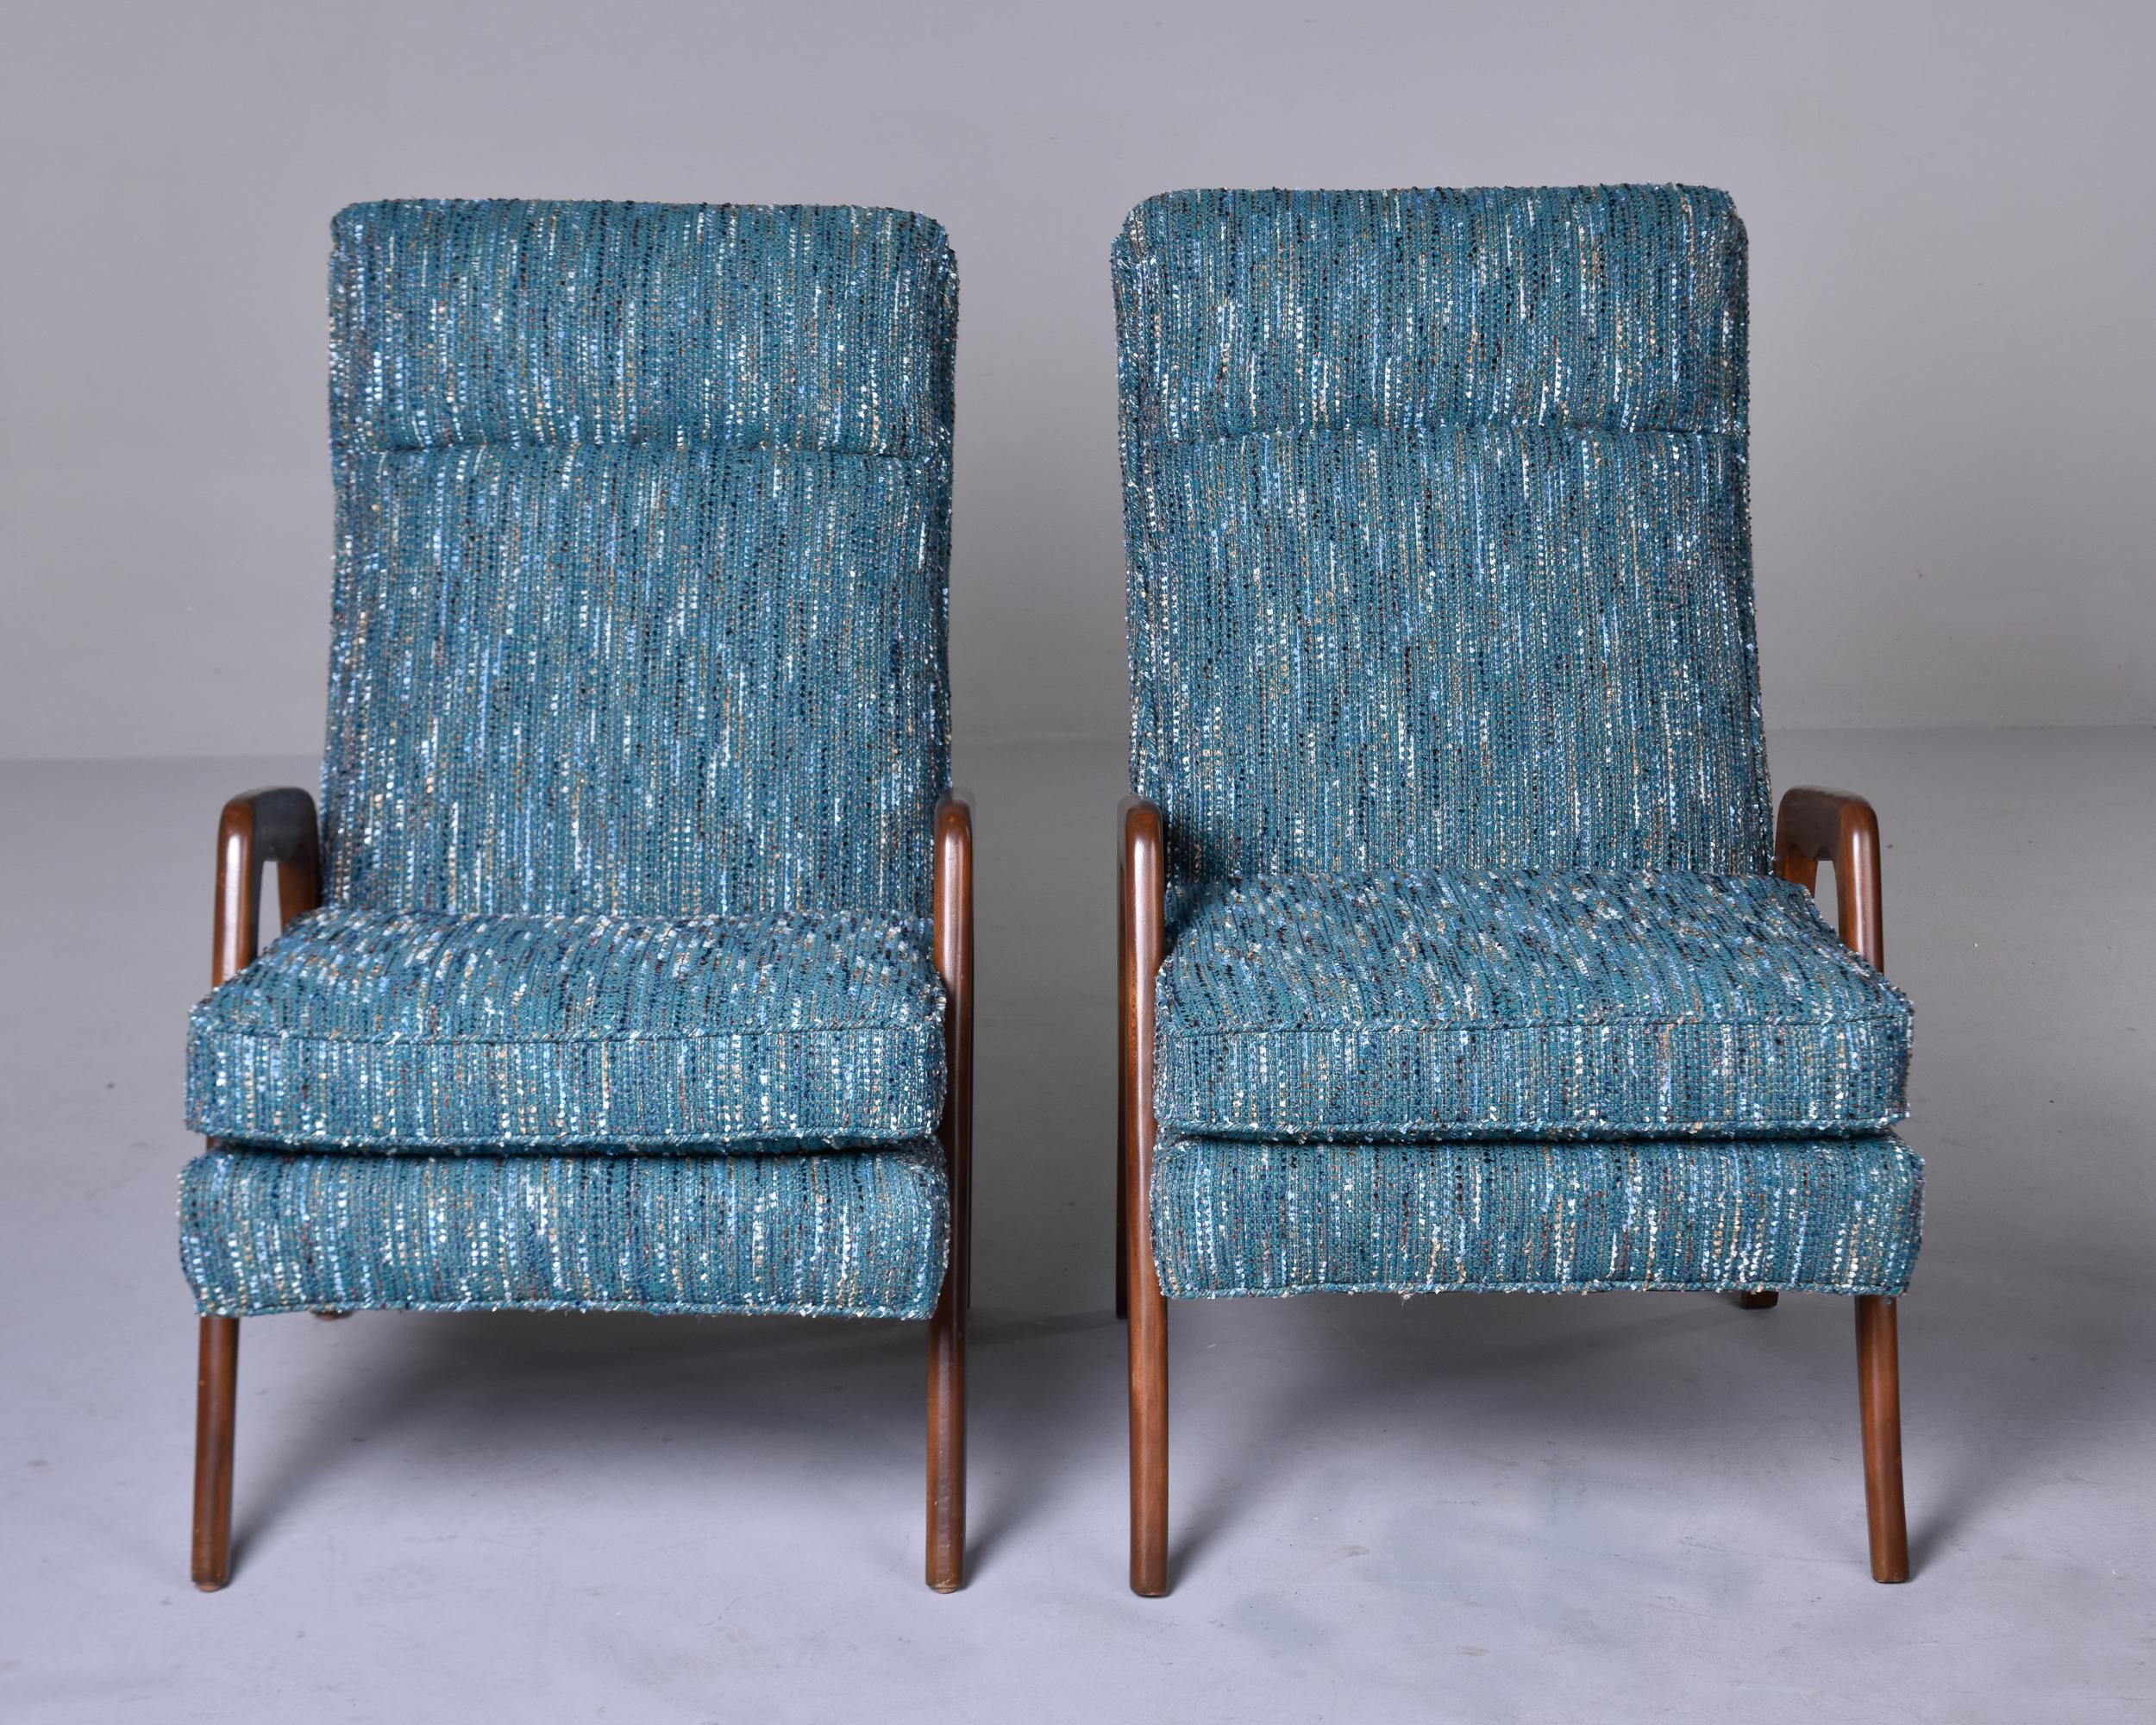 Pair of Mid-Century Italian Chairs with New Teal Tweed Upholstery In Good Condition For Sale In Troy, MI